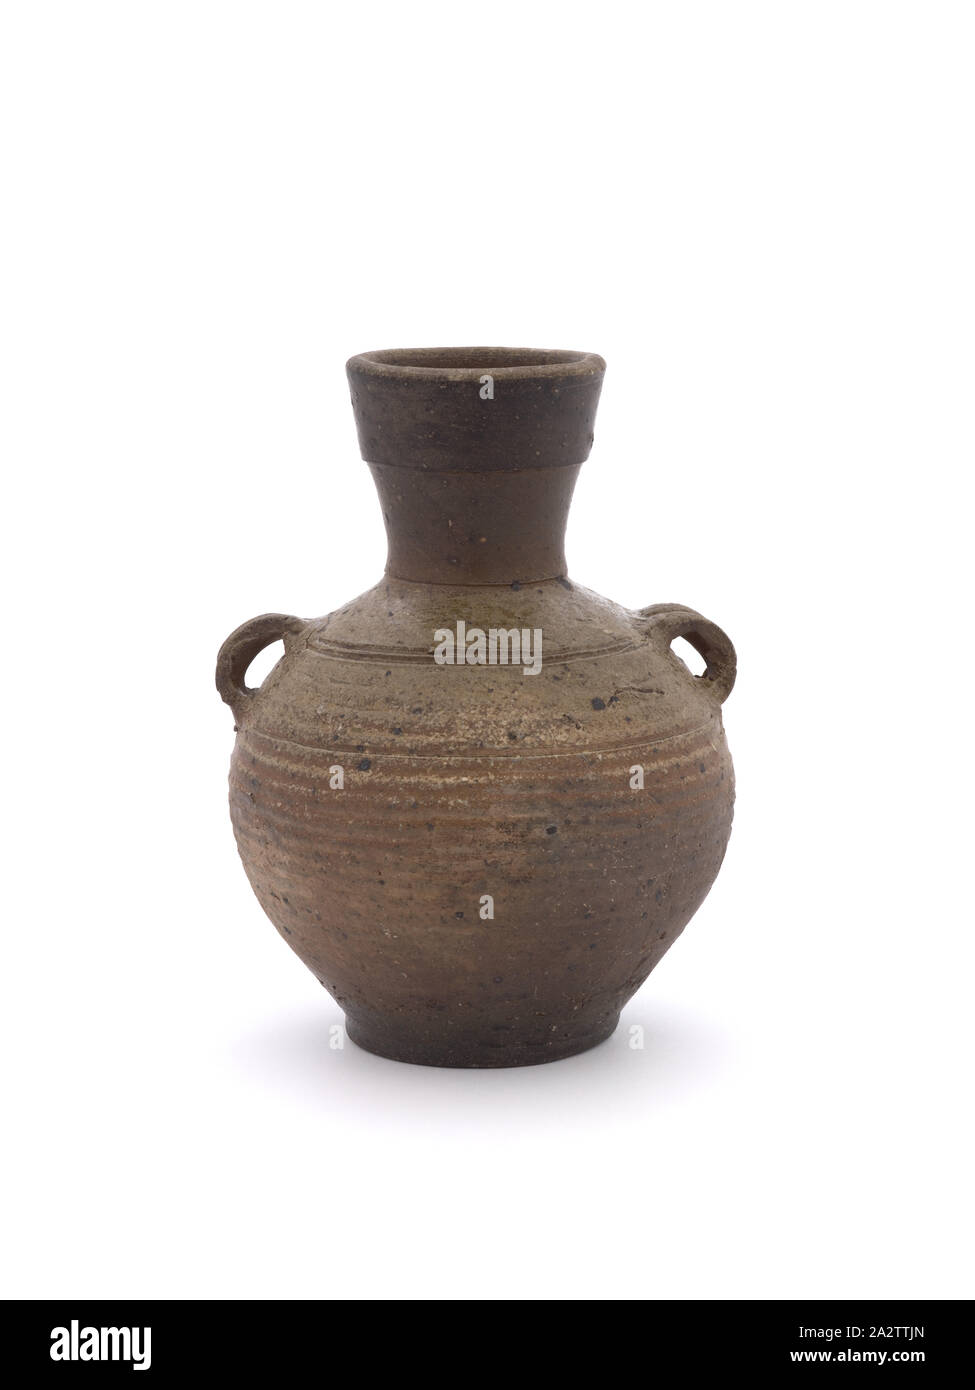 vase, Unknown, Eastern Han dynasty, 100s, Olive Green Glaze, 7-11/16 x 5-3/8 (diam.) in., Chinese, Asian Art Stock Photo